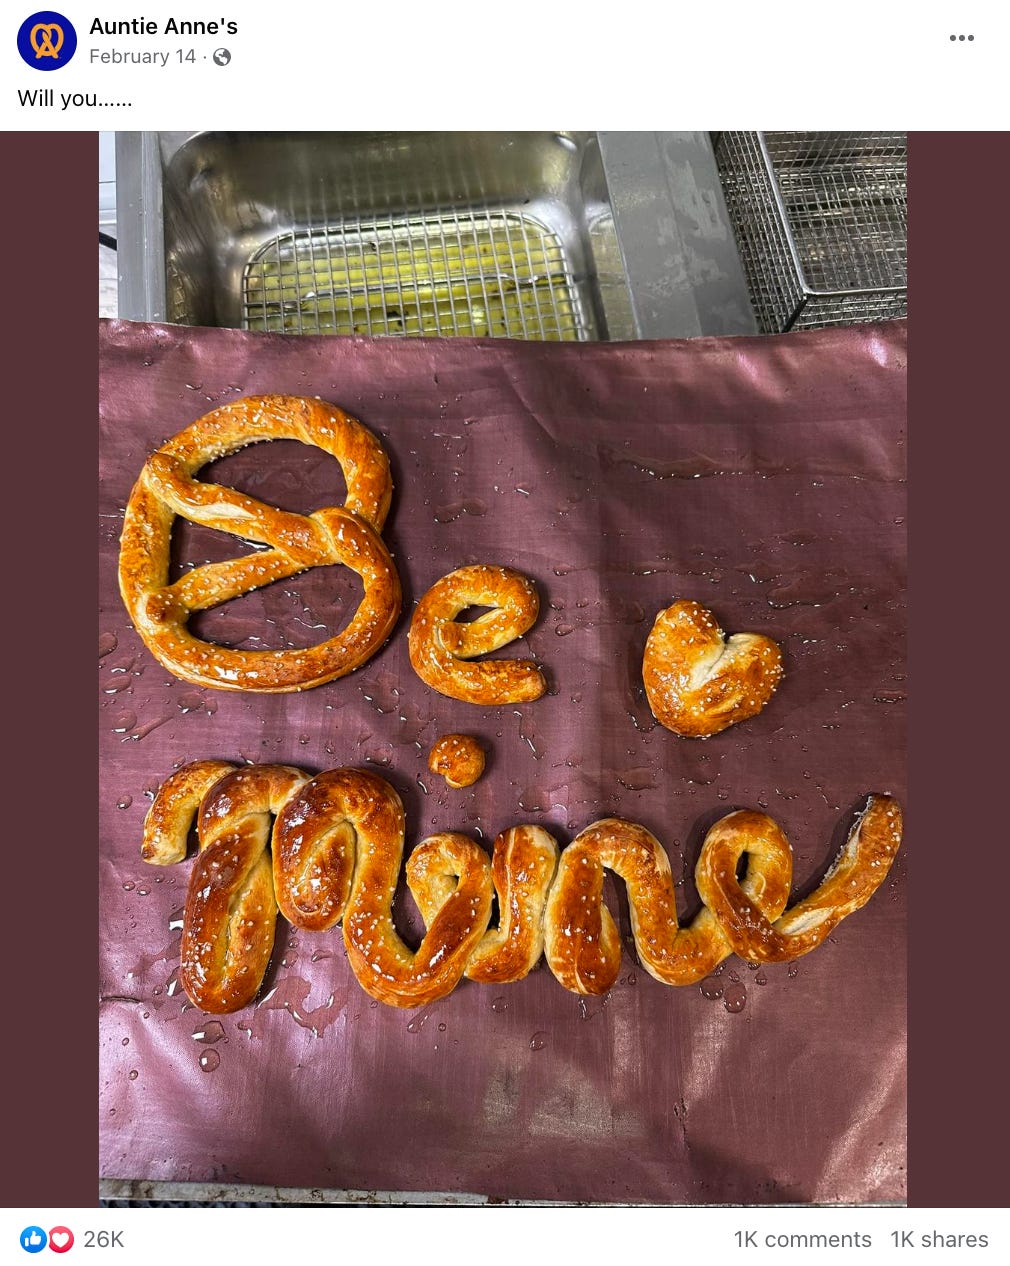 example facebook post from auntie anne's that says "will you..." and then shows a photo of pretzels spelling out "be mine"